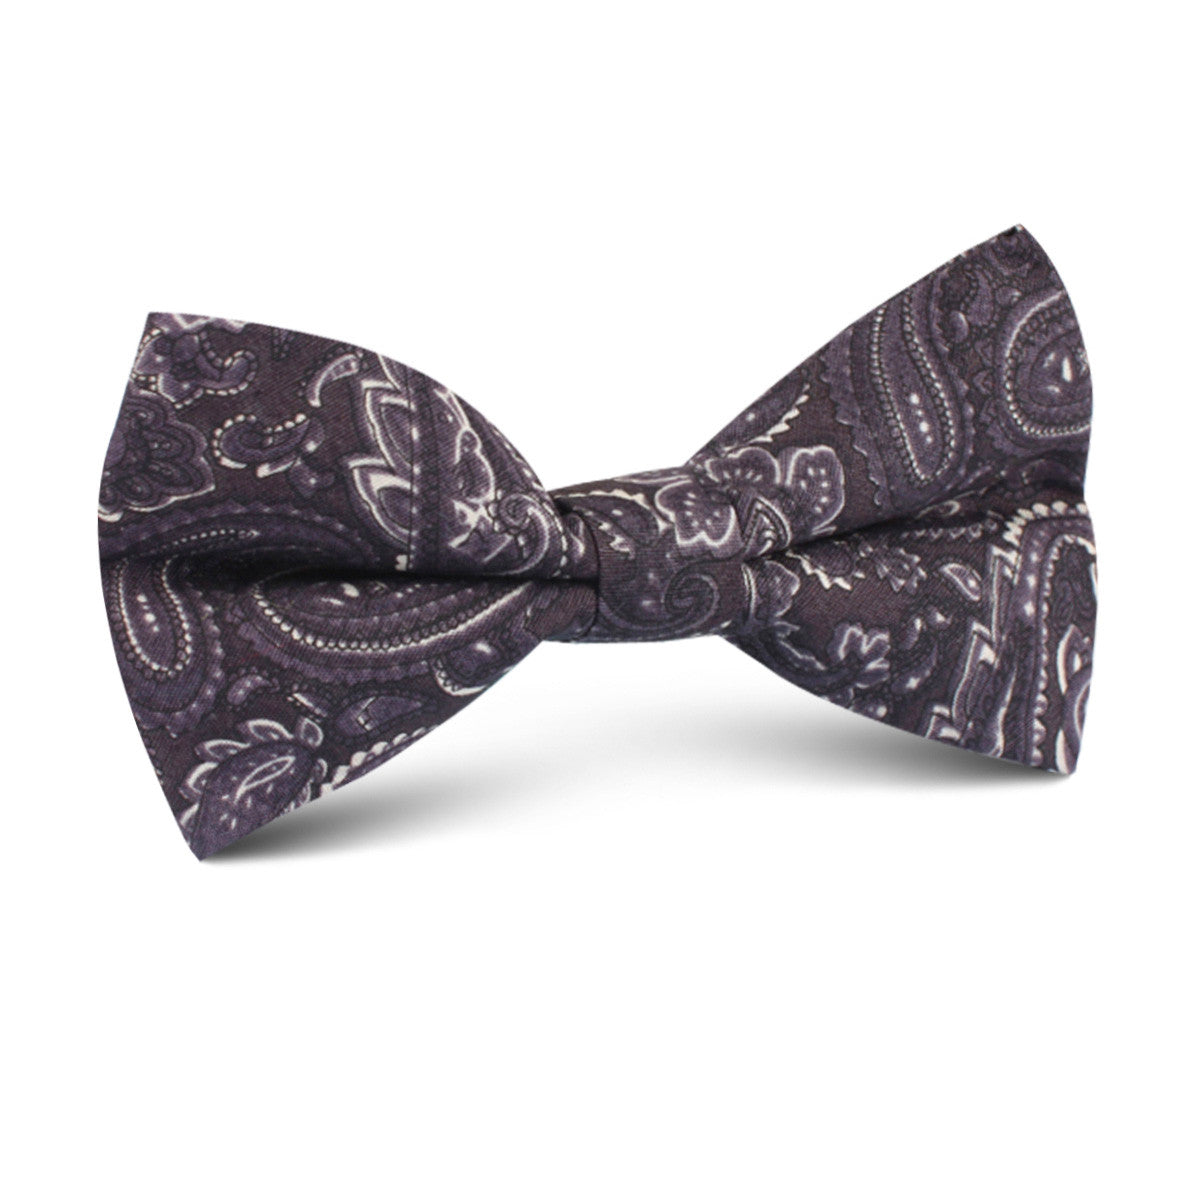 Culaccino Kettle Black Paisley Kids Bow Tie